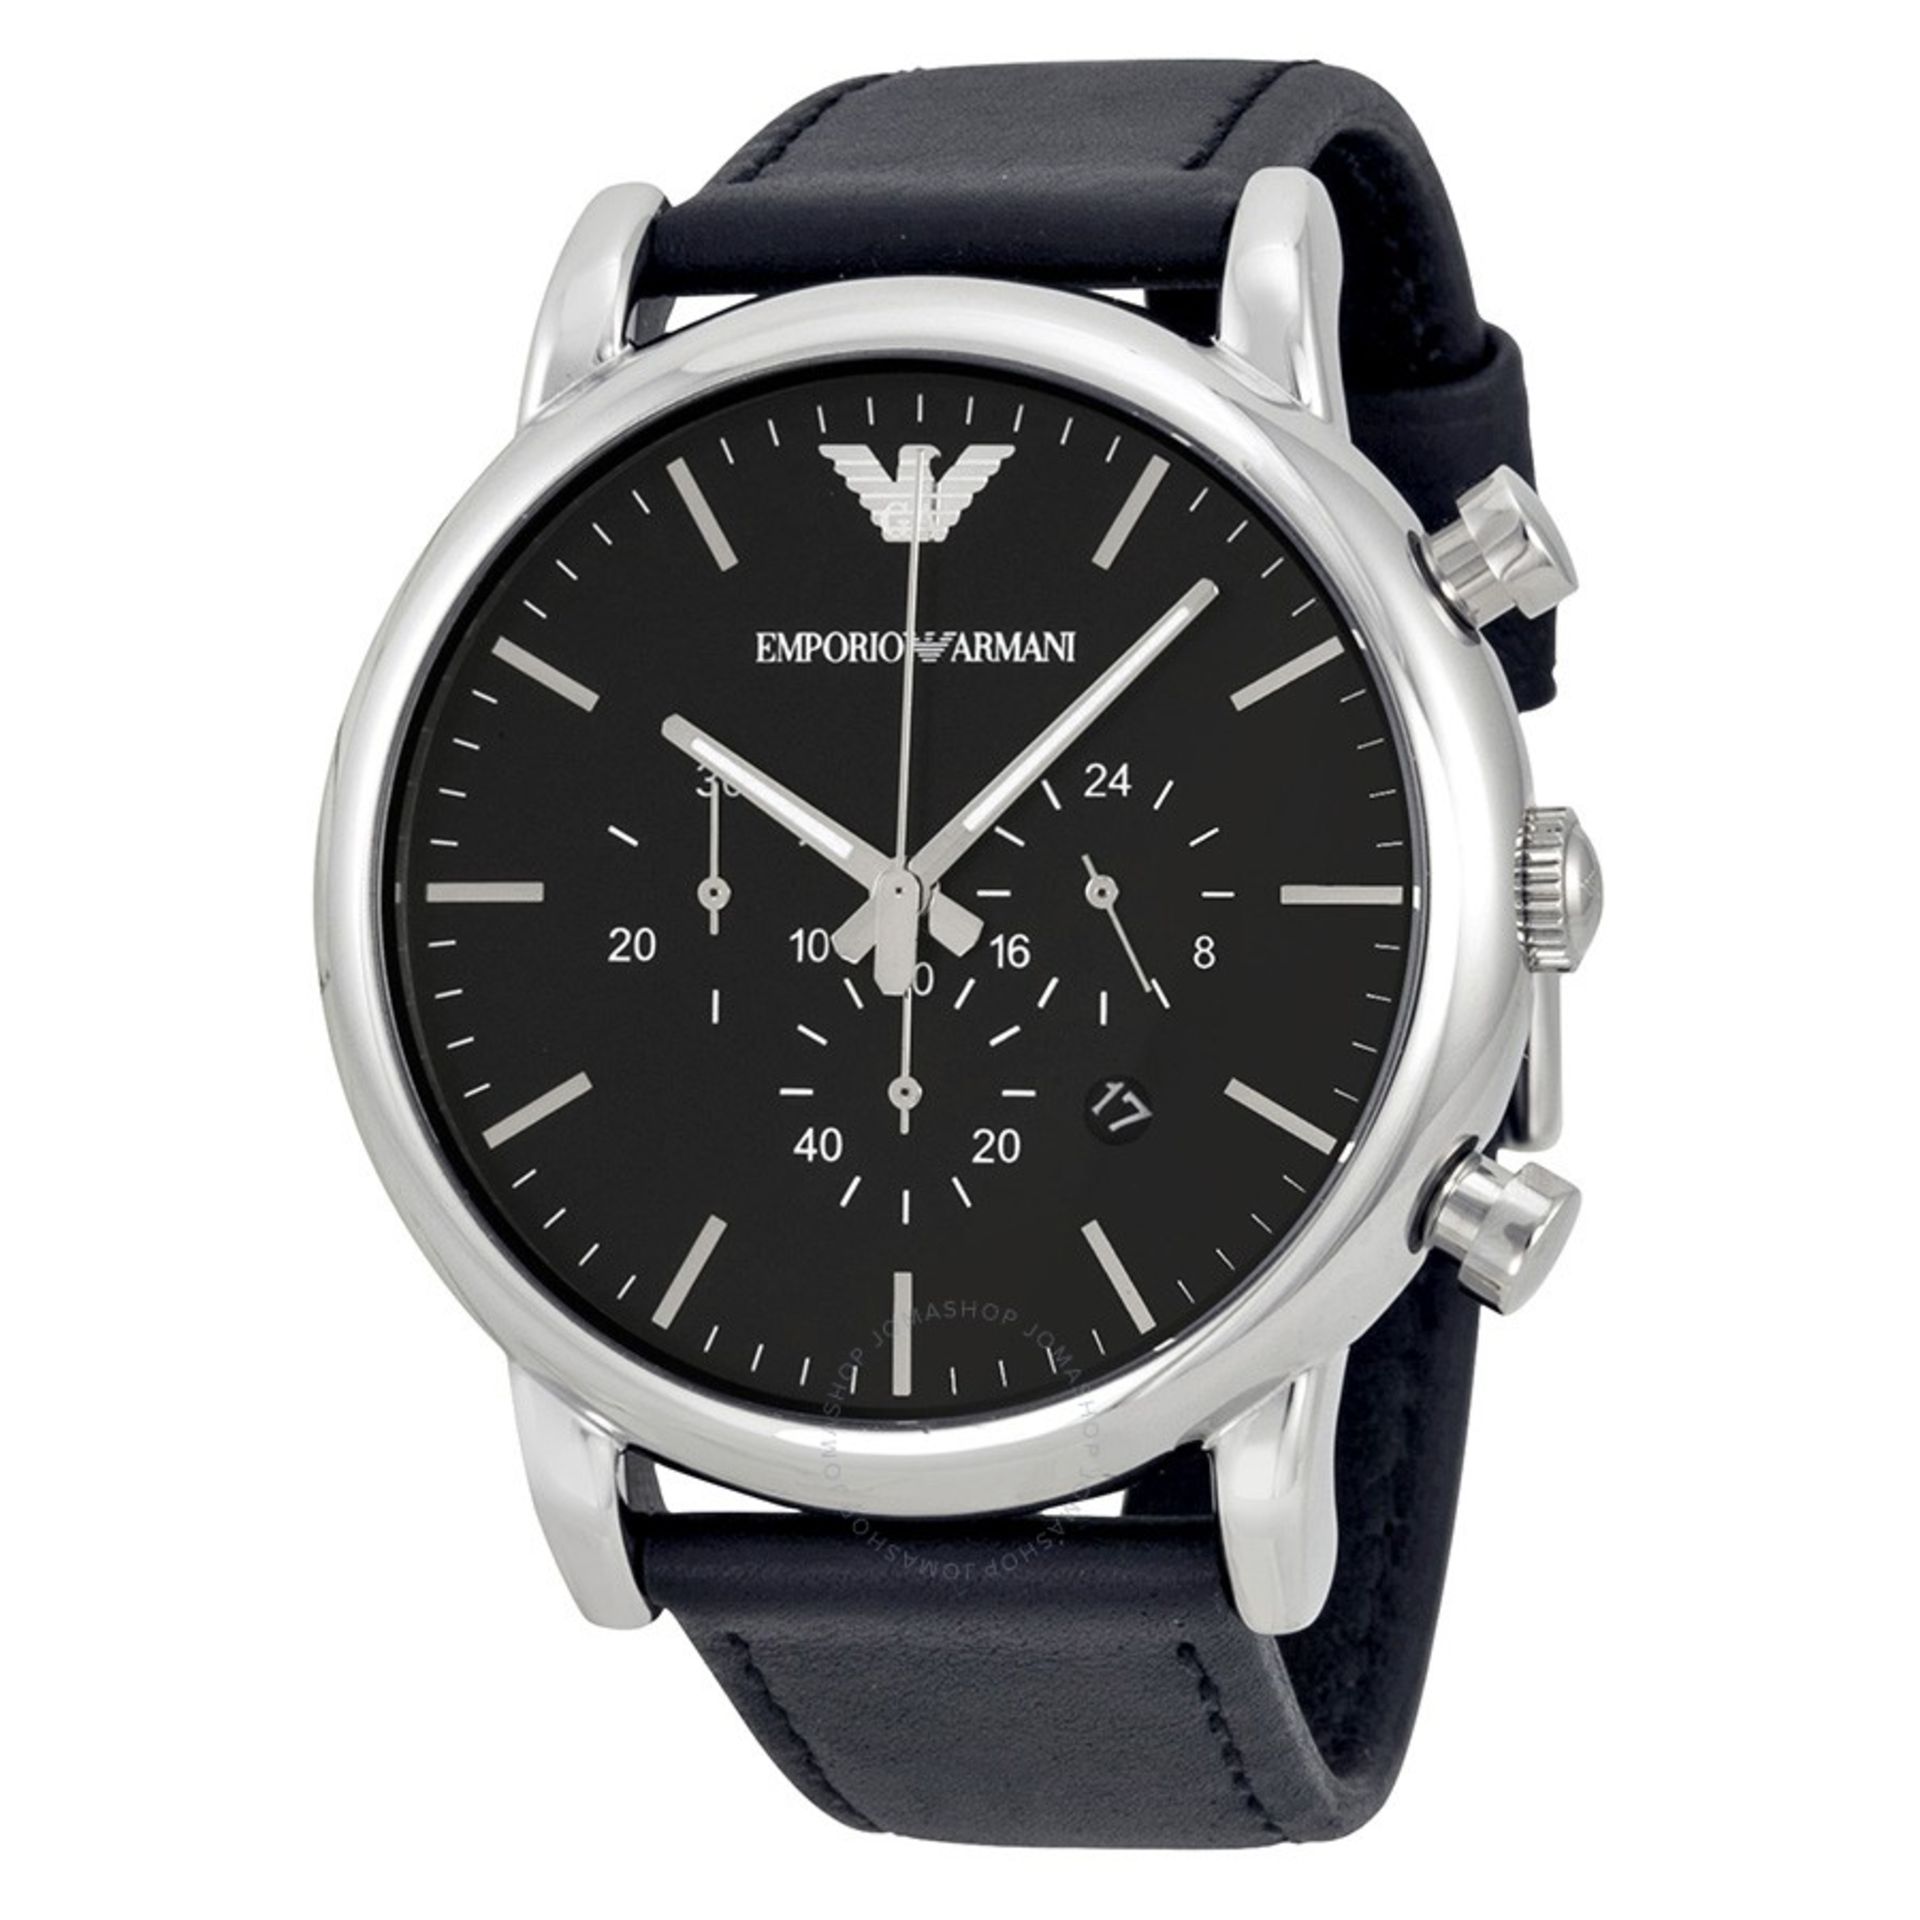 V Brand New Gents Emporio Armani AR1828 Watch With Date - Black Face Silver Indicies Watch Shop £